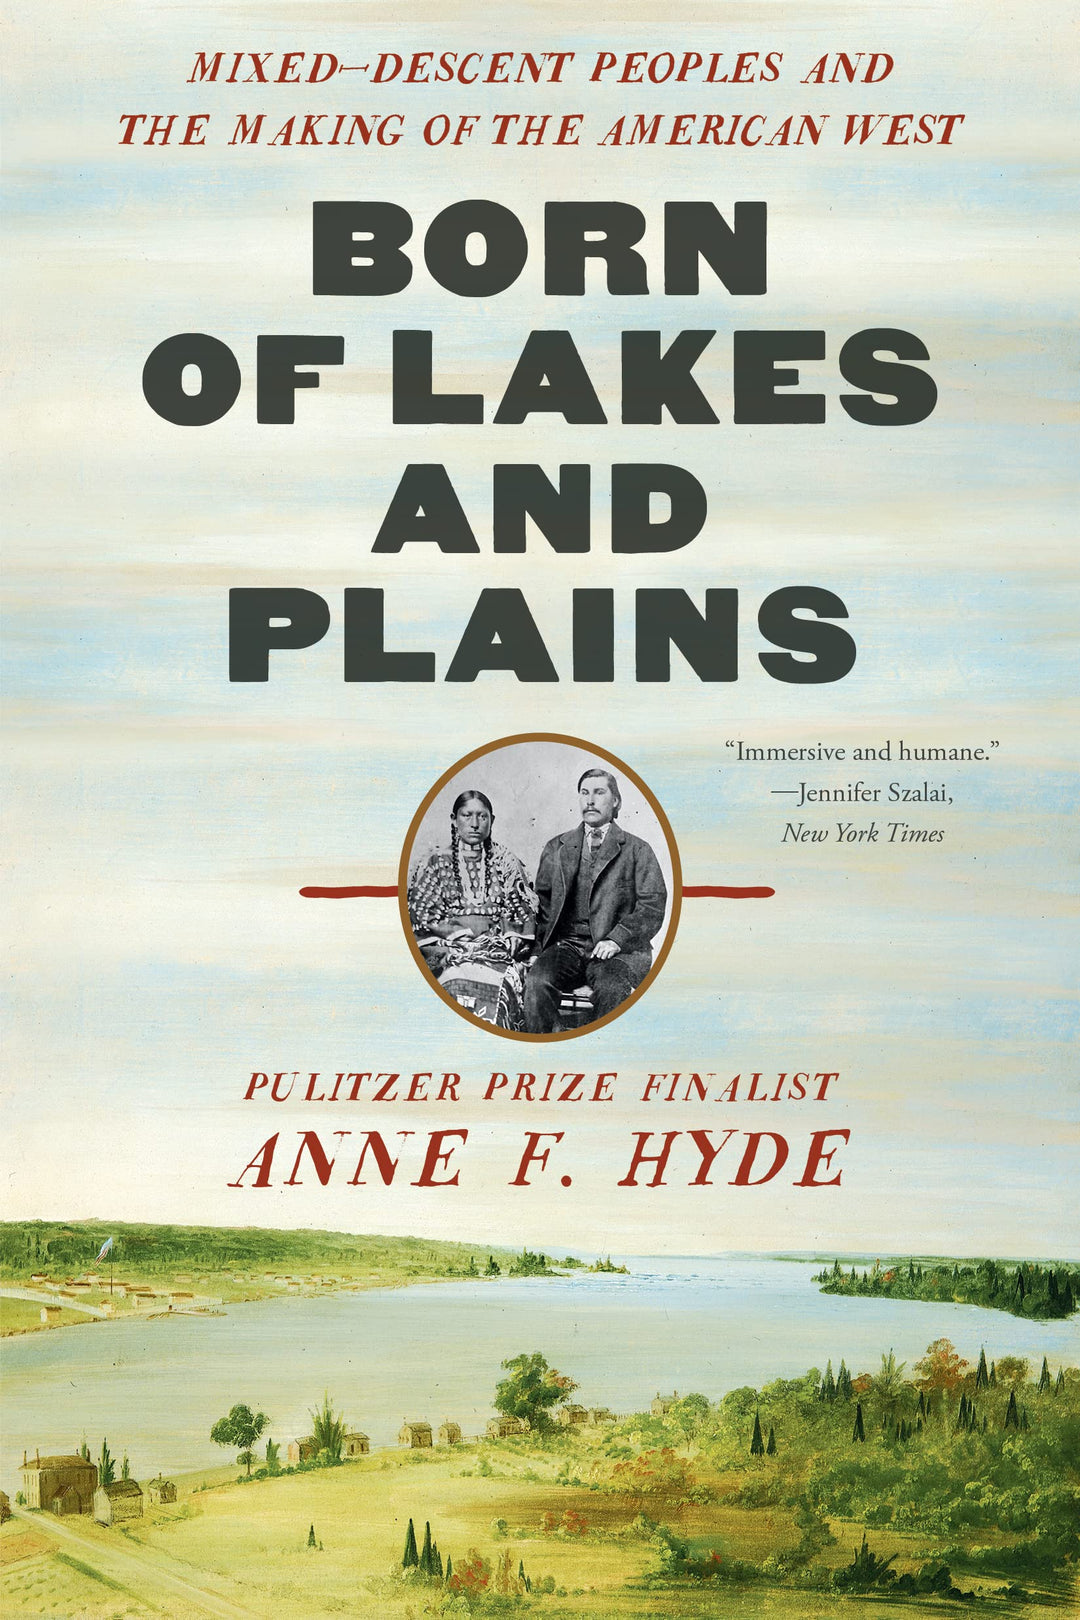 Born of Lakes and Plains: Mixed-Descent Peoples and the Making of the American West by Anne. F. Hyde